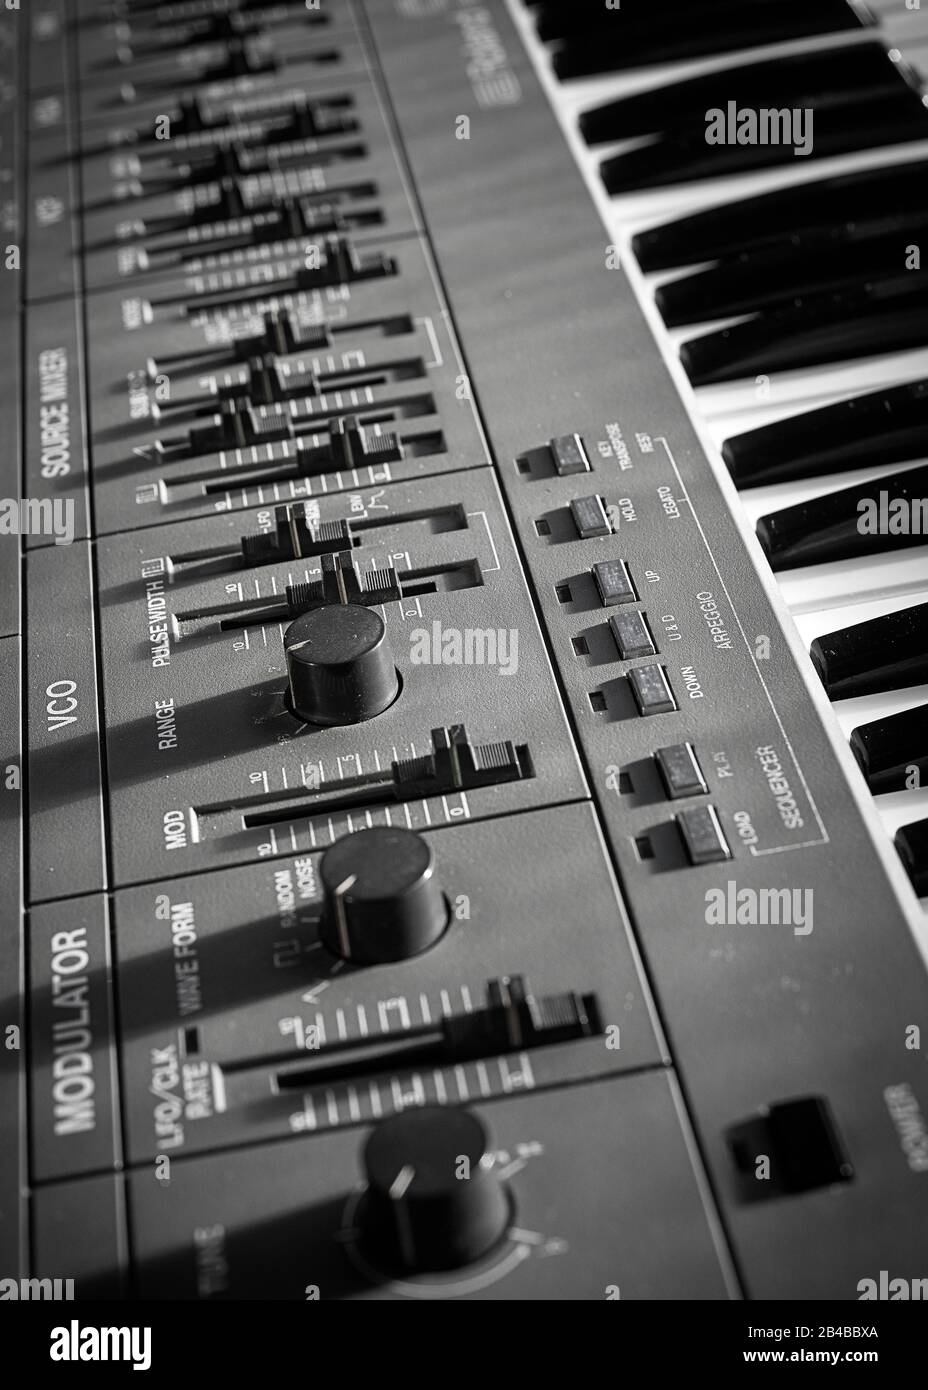 Roland SH101 Analogue Synthesiser Stock Photo